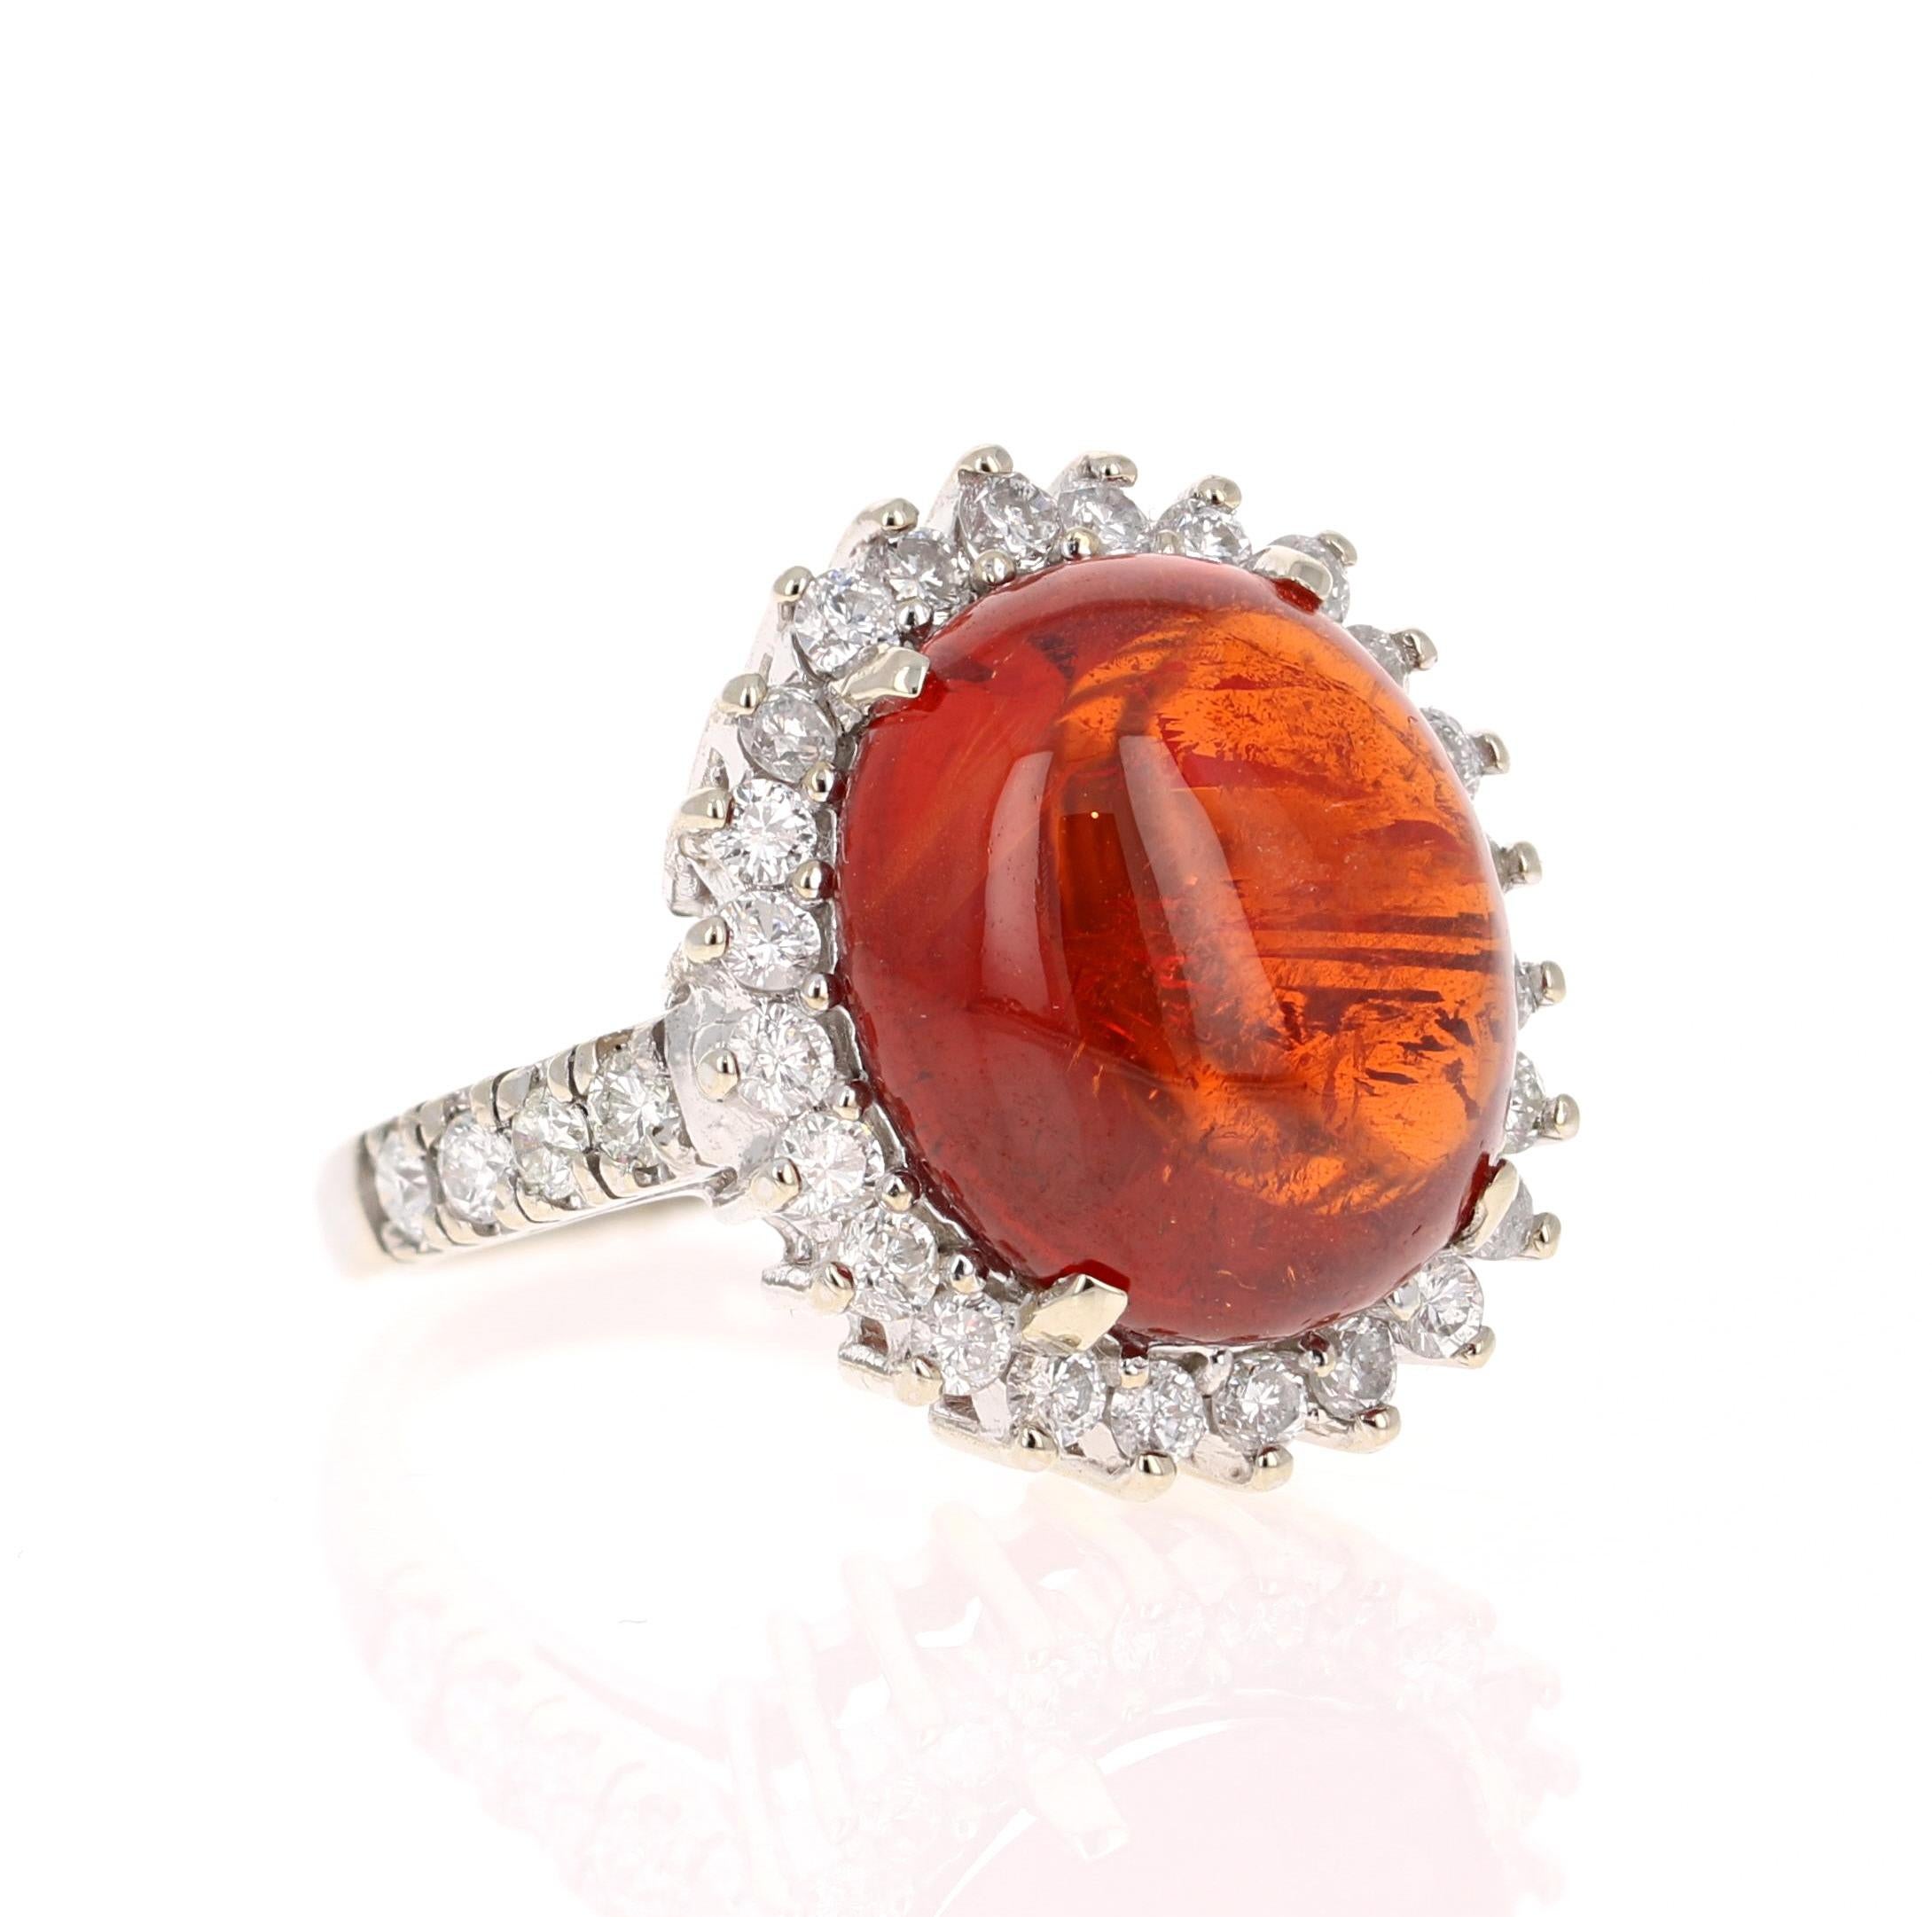 16.69 Carat Cabochon Spessartine Diamond White Gold Cocktail Ring!
This beautiful ring has a huge 15.51 Carat Cabochon Spessartine set in the center of the ring. A Spessartine is a natural stone that is actually a part of the Garnet family of